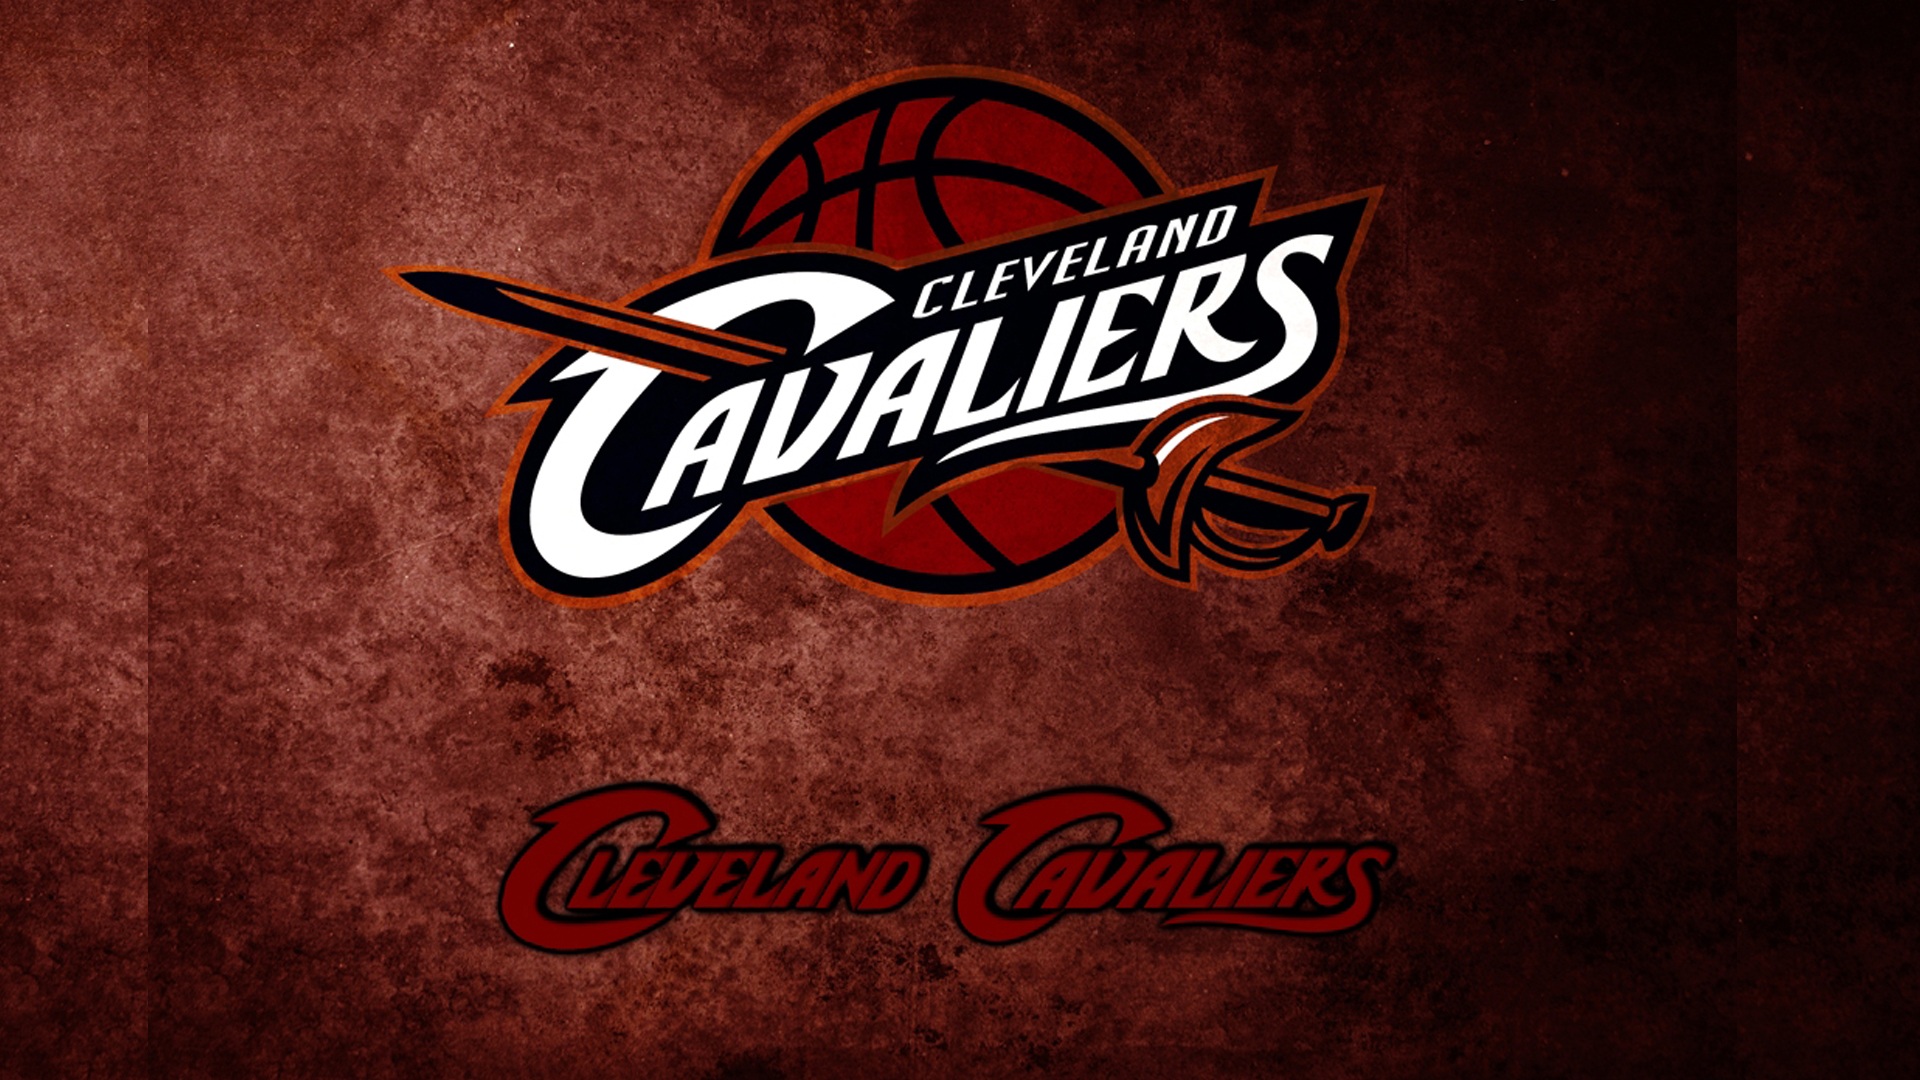 Cleveland cavaliers mobile HD wallpapers